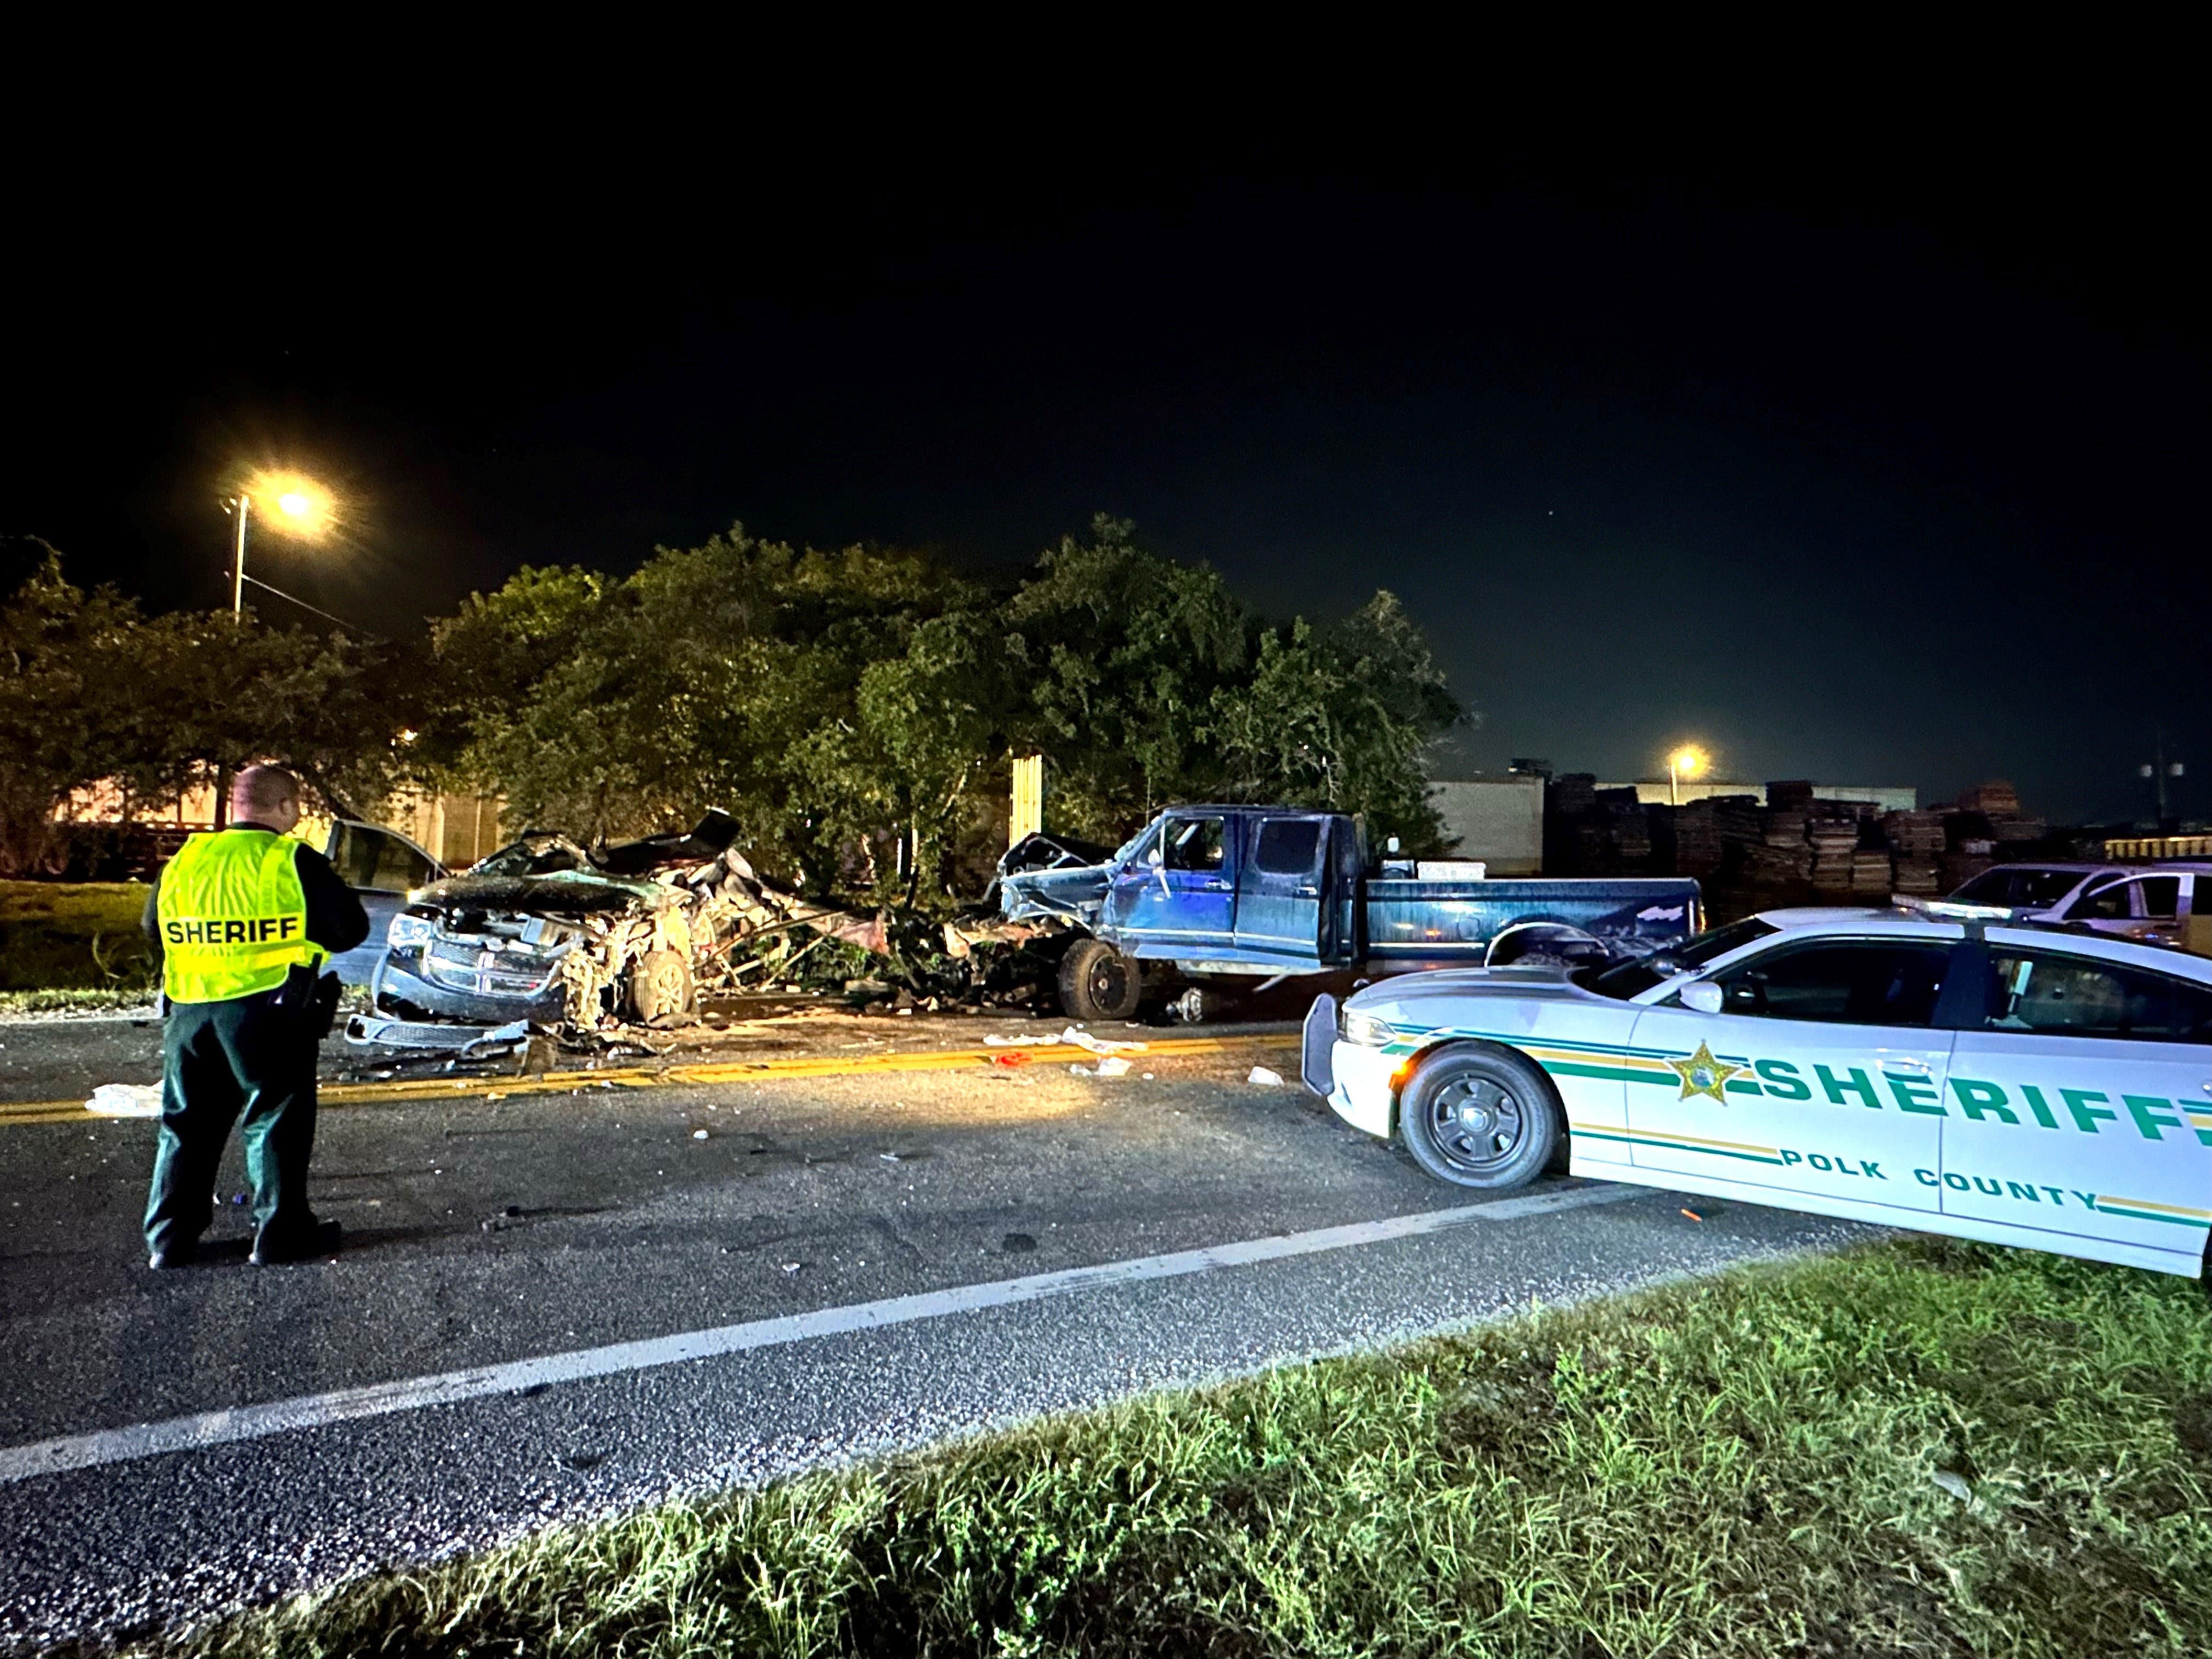 5-year-old girl dies in Auburndale crash. Bartow man charged with DUI manslaughter